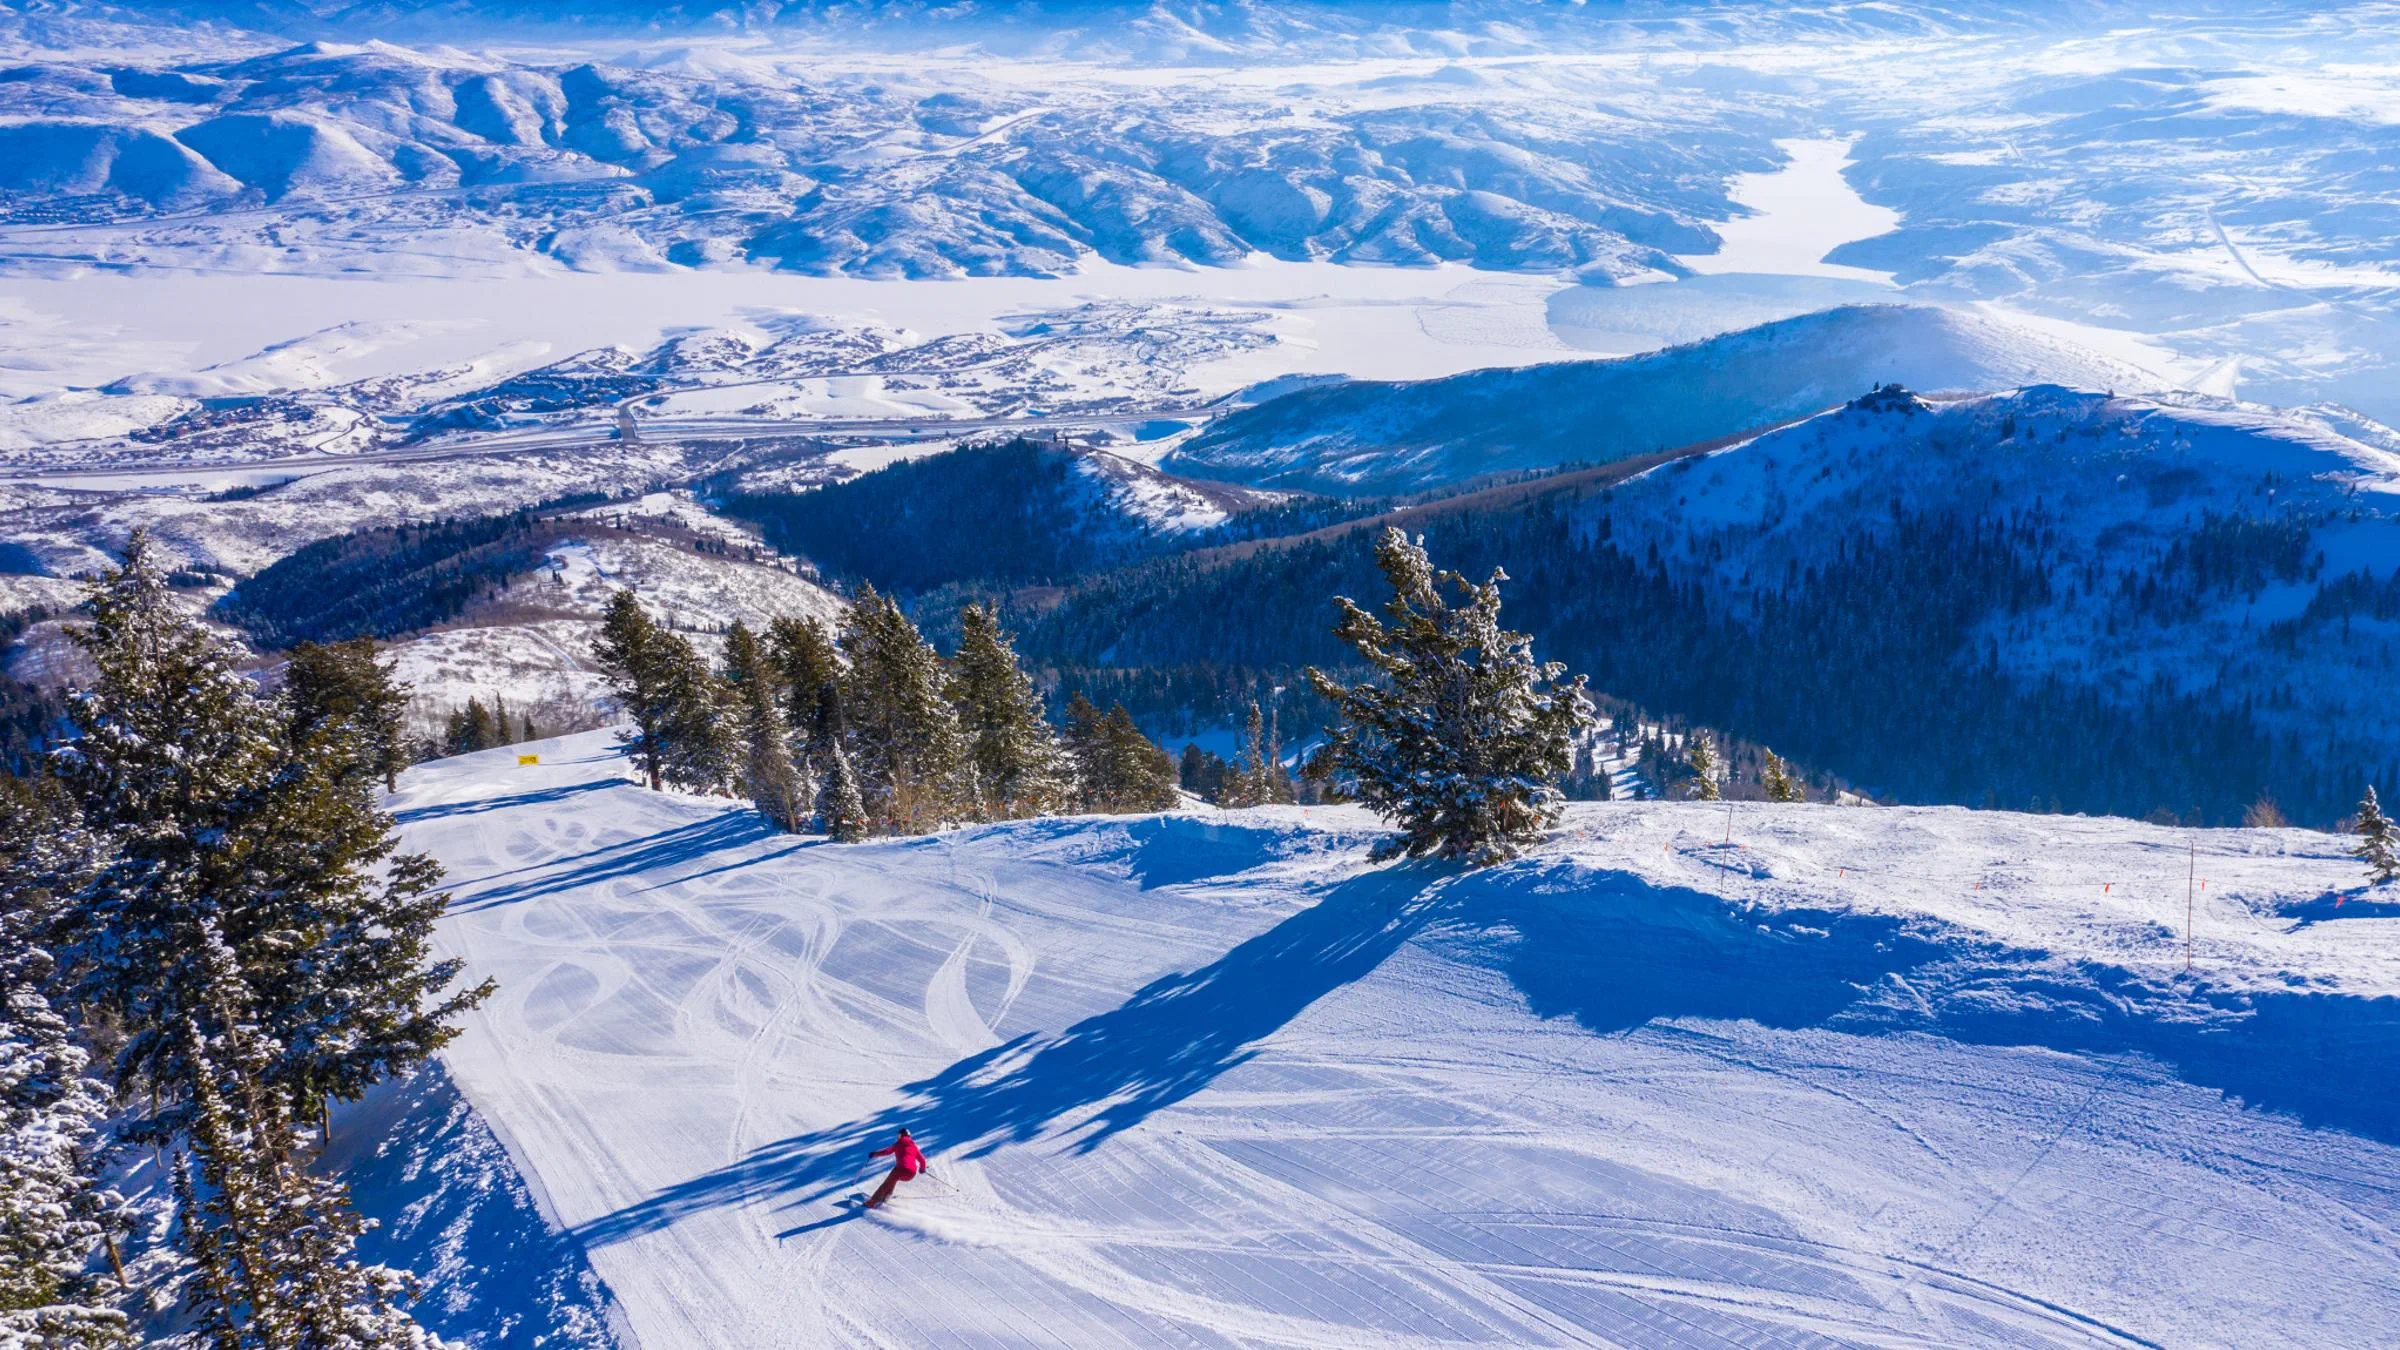 A guest skiing on a groomed run at Deer Valley Resort